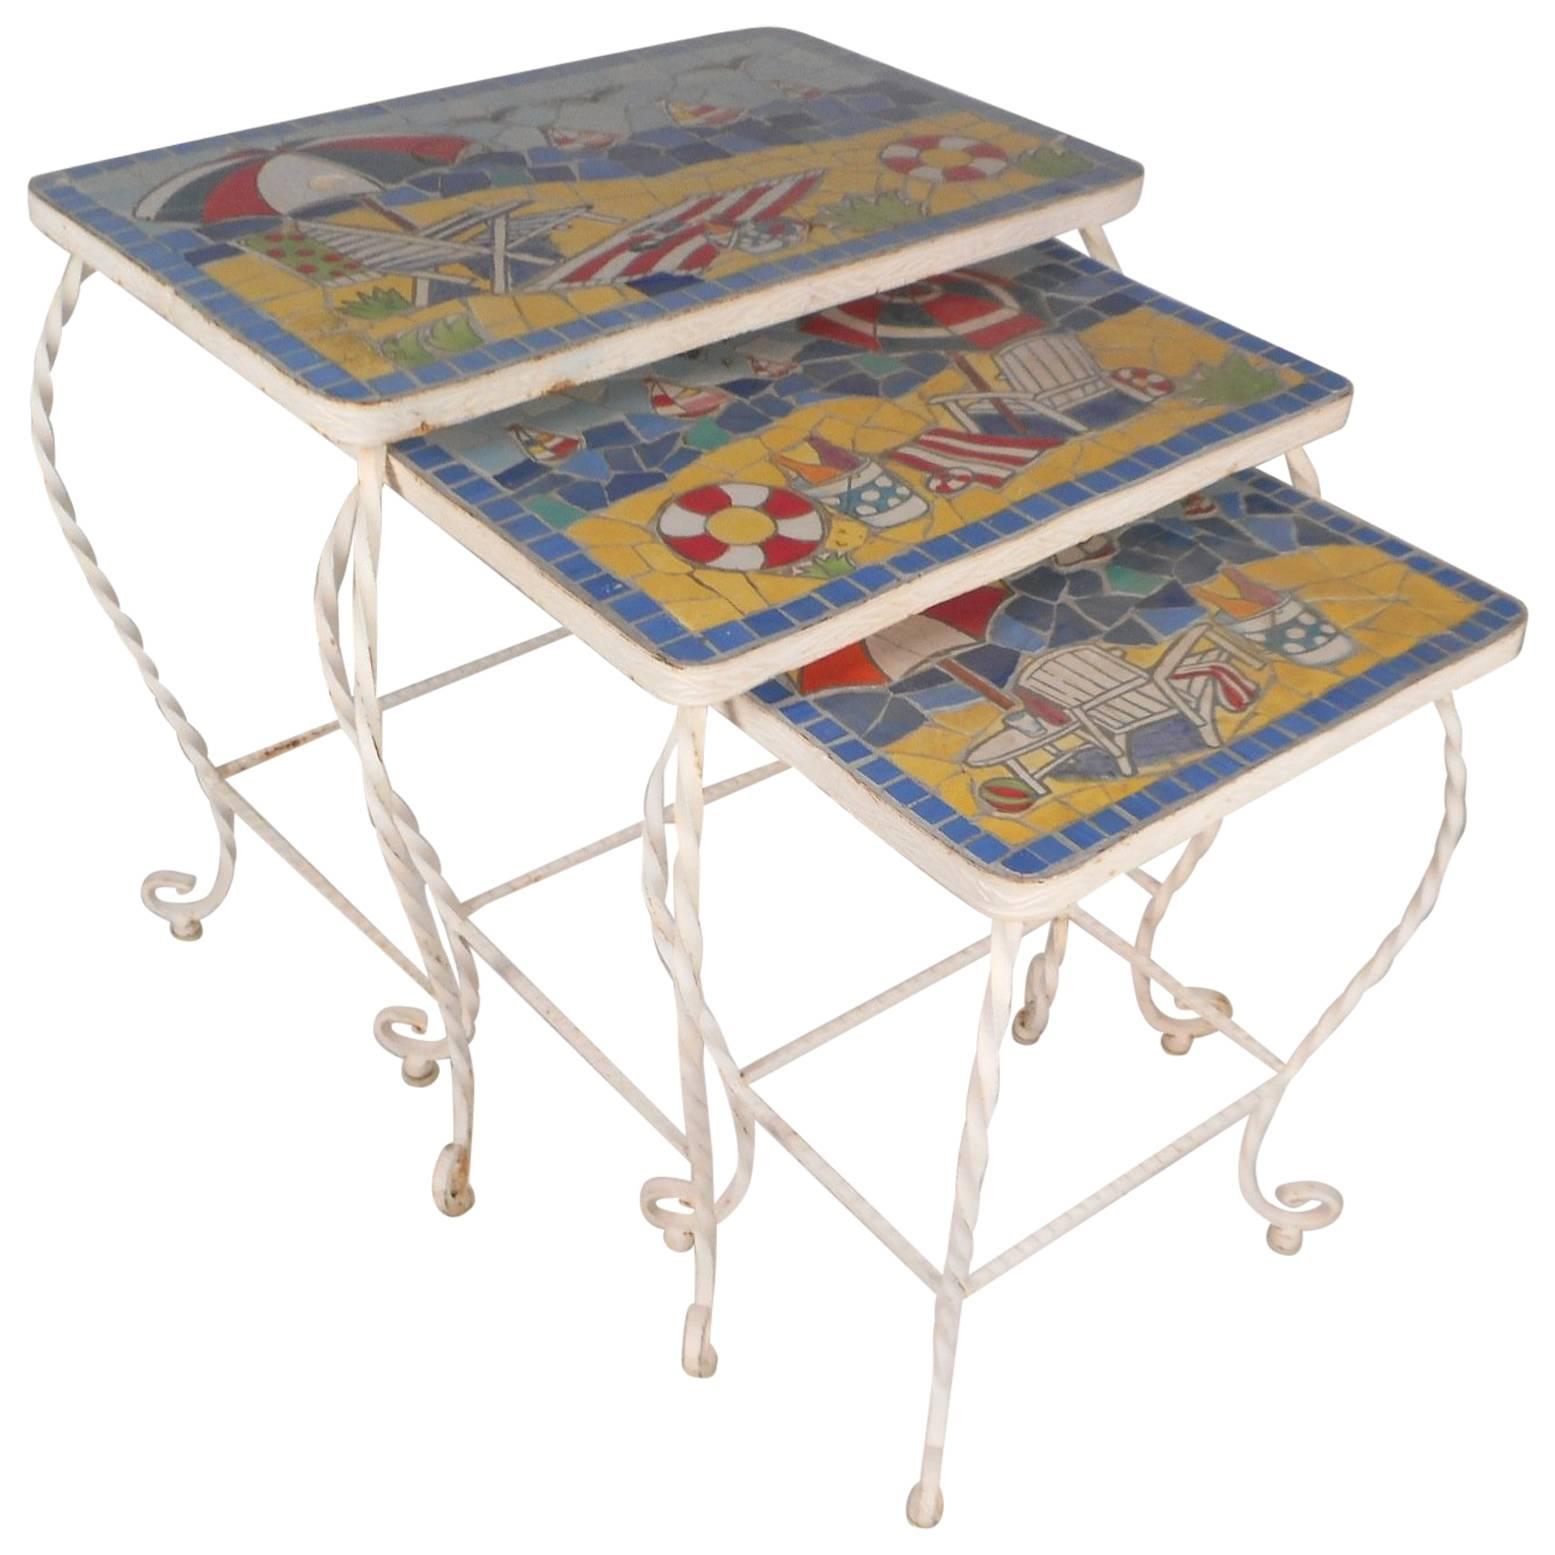 Set of Vintage Tile Top and Iron Nesting Tables with Beach Display